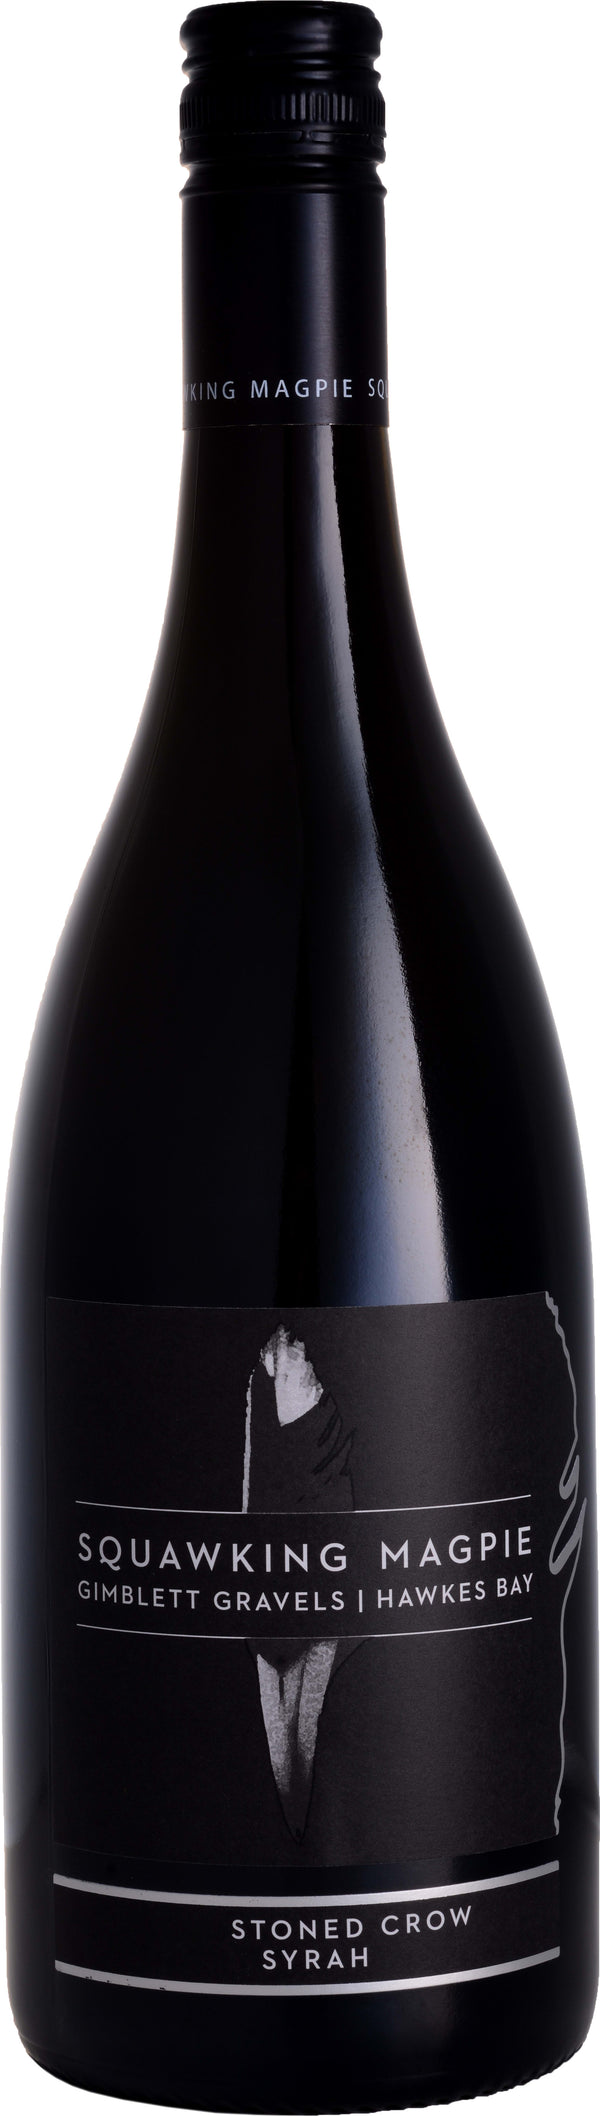 Squawking Magpie 2015 Stoned Crow Syrah, Squawking Magpie 2015 6x75cl - Just Wines 